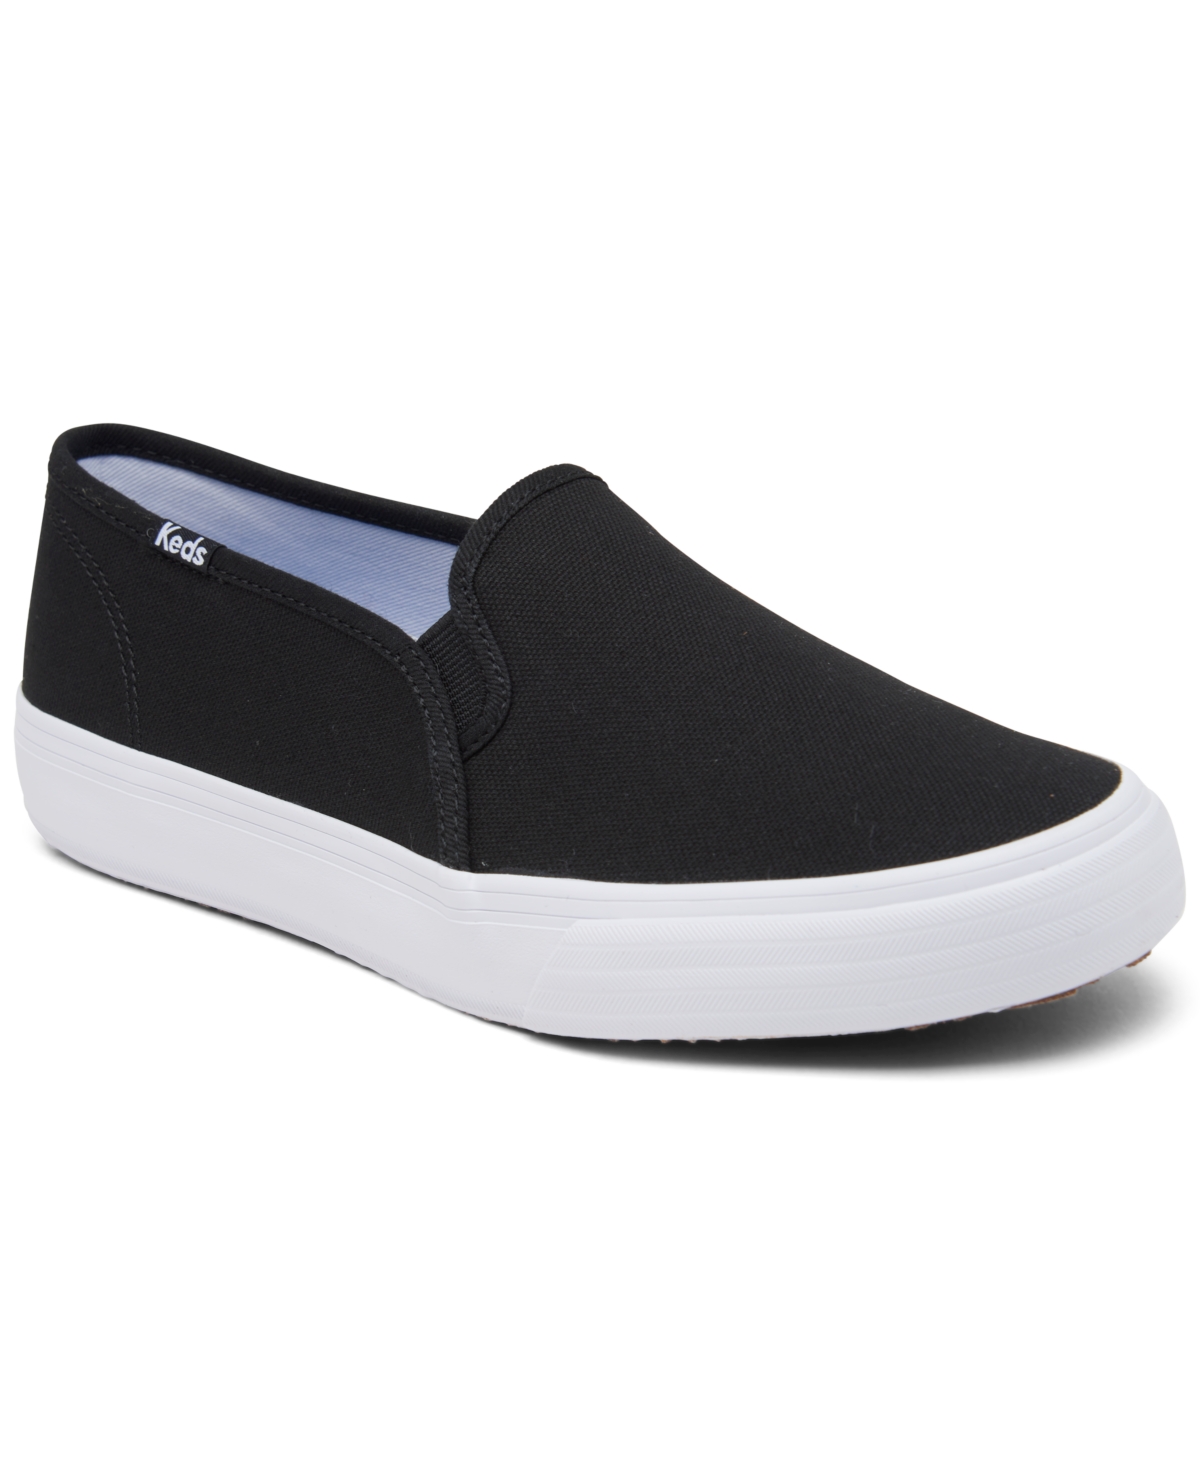 Women's Double Decker Canvas Slip-On Casual Sneakers from Finish Line - Black